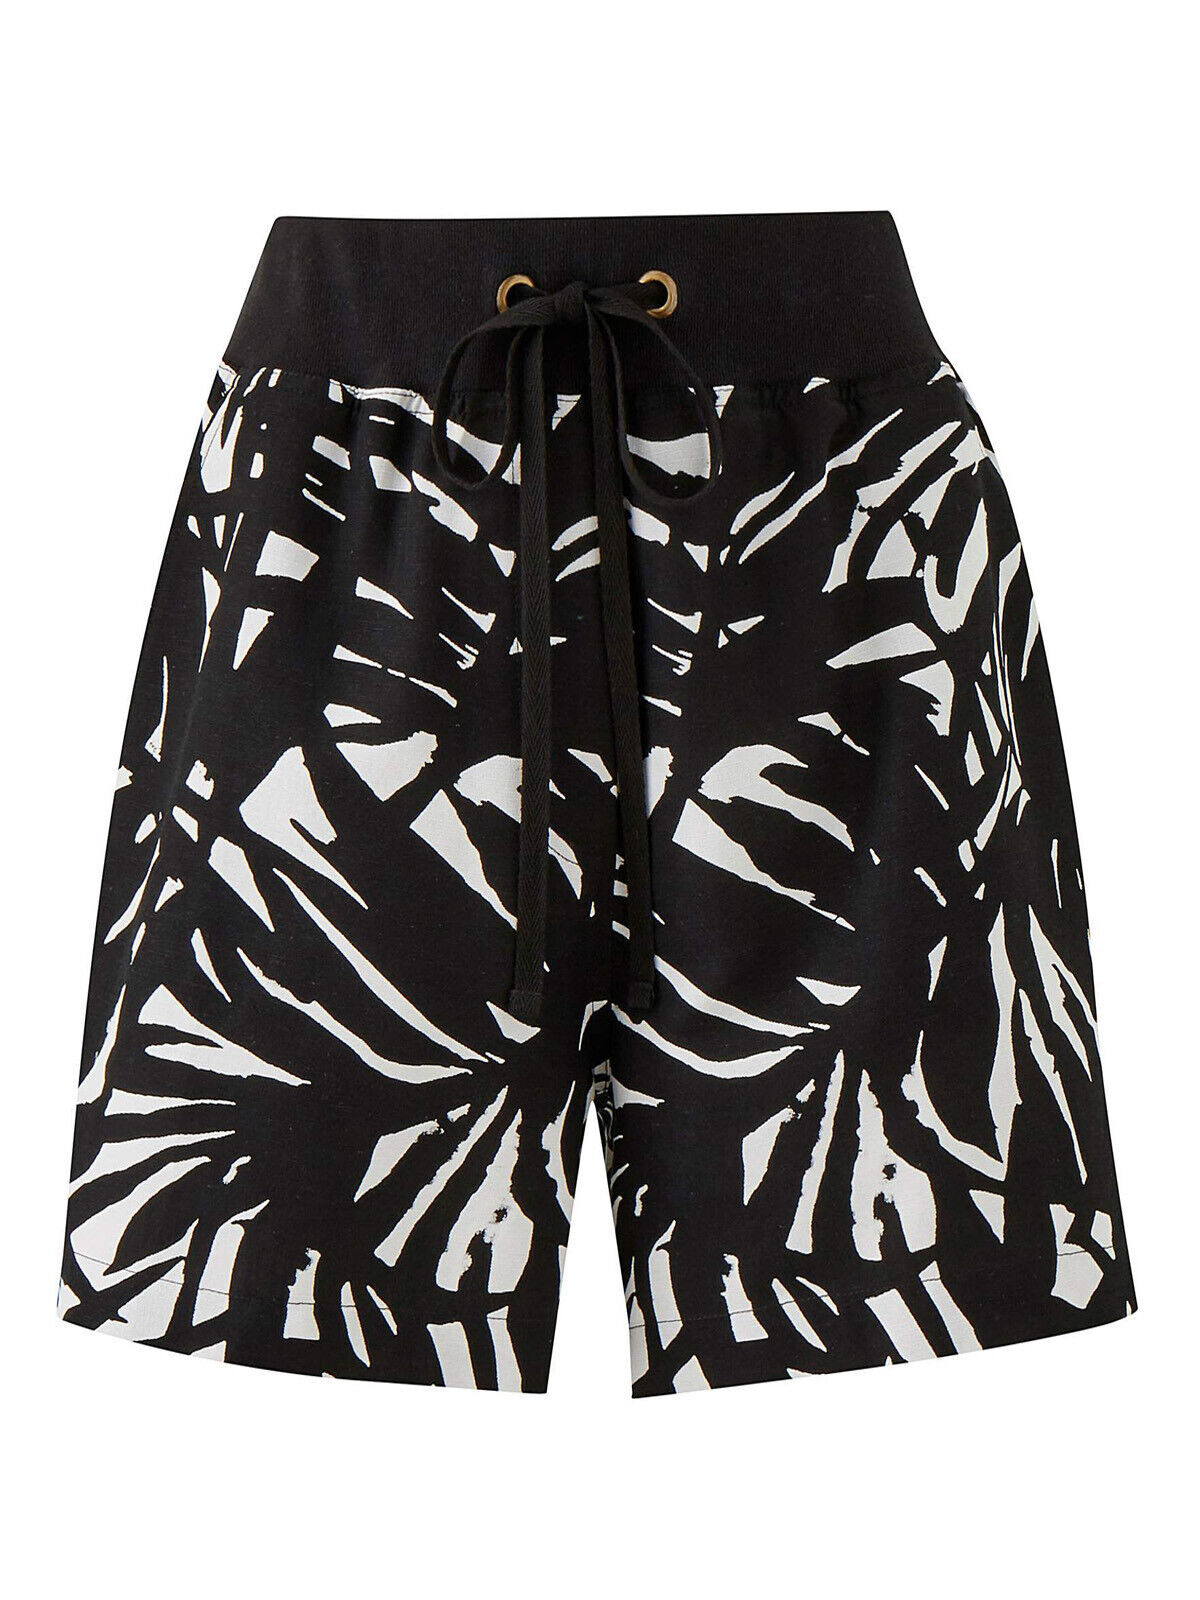 New Capsule Black Linen Blend Printed Slouch Shorts in Sizes 30